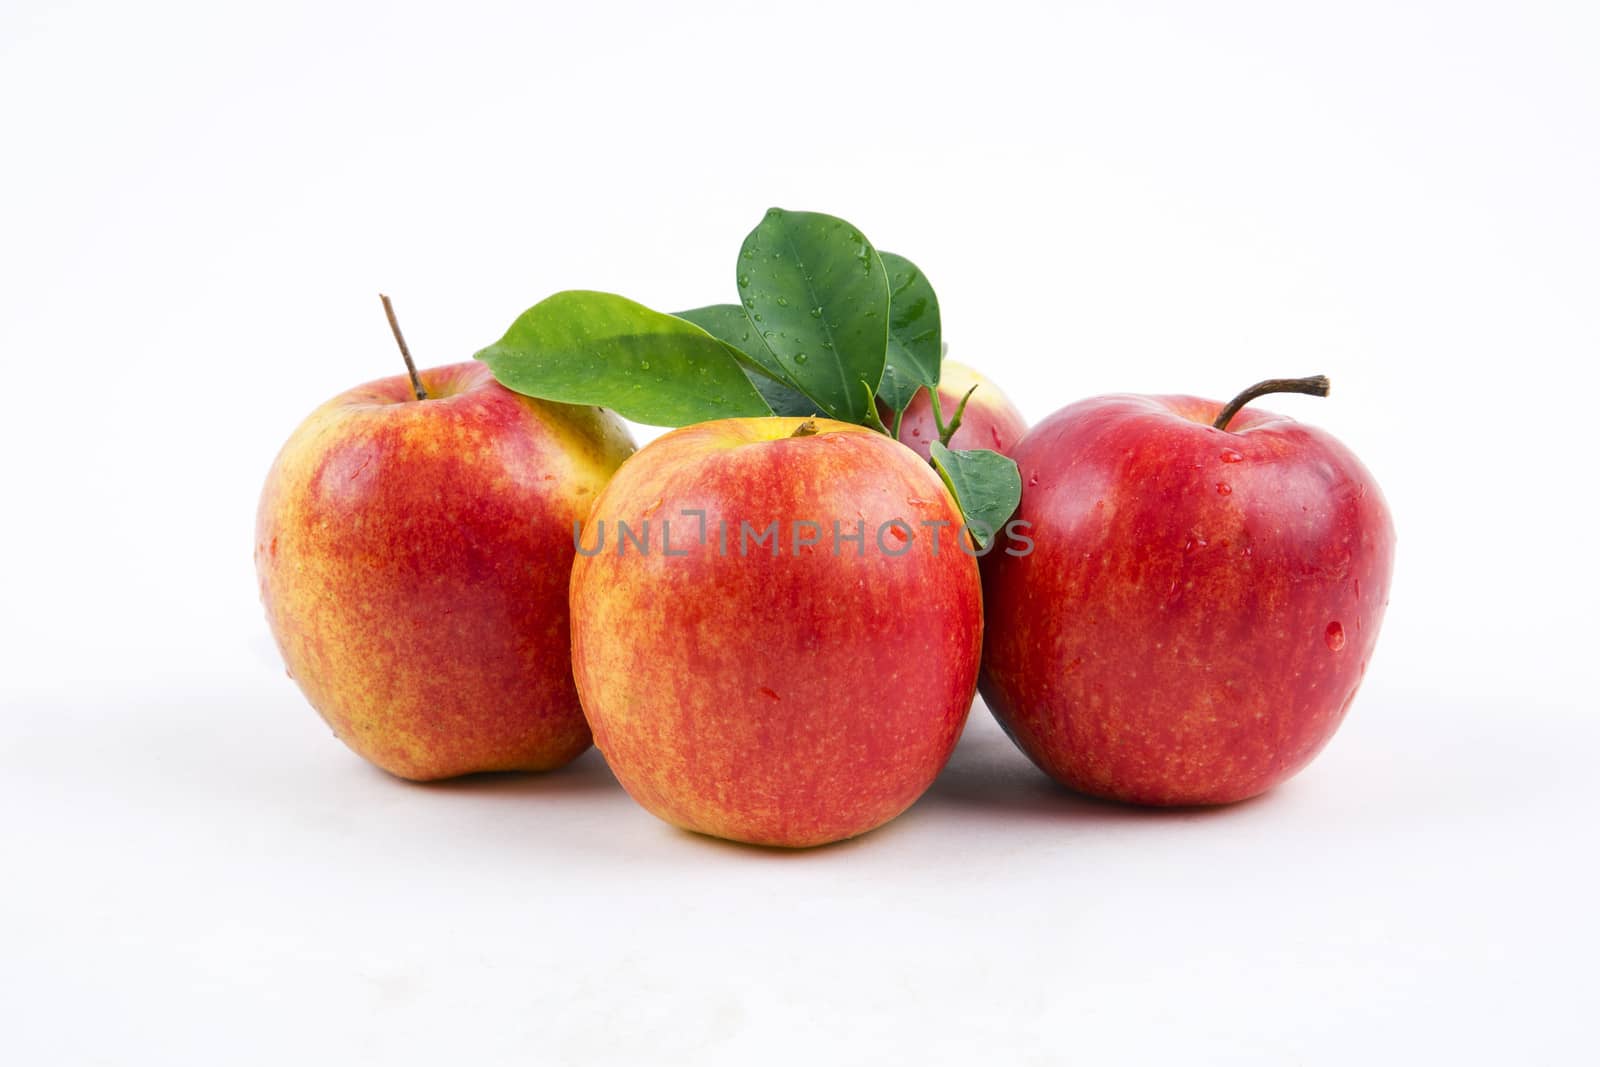 Fresh apples with leaves on a white background.